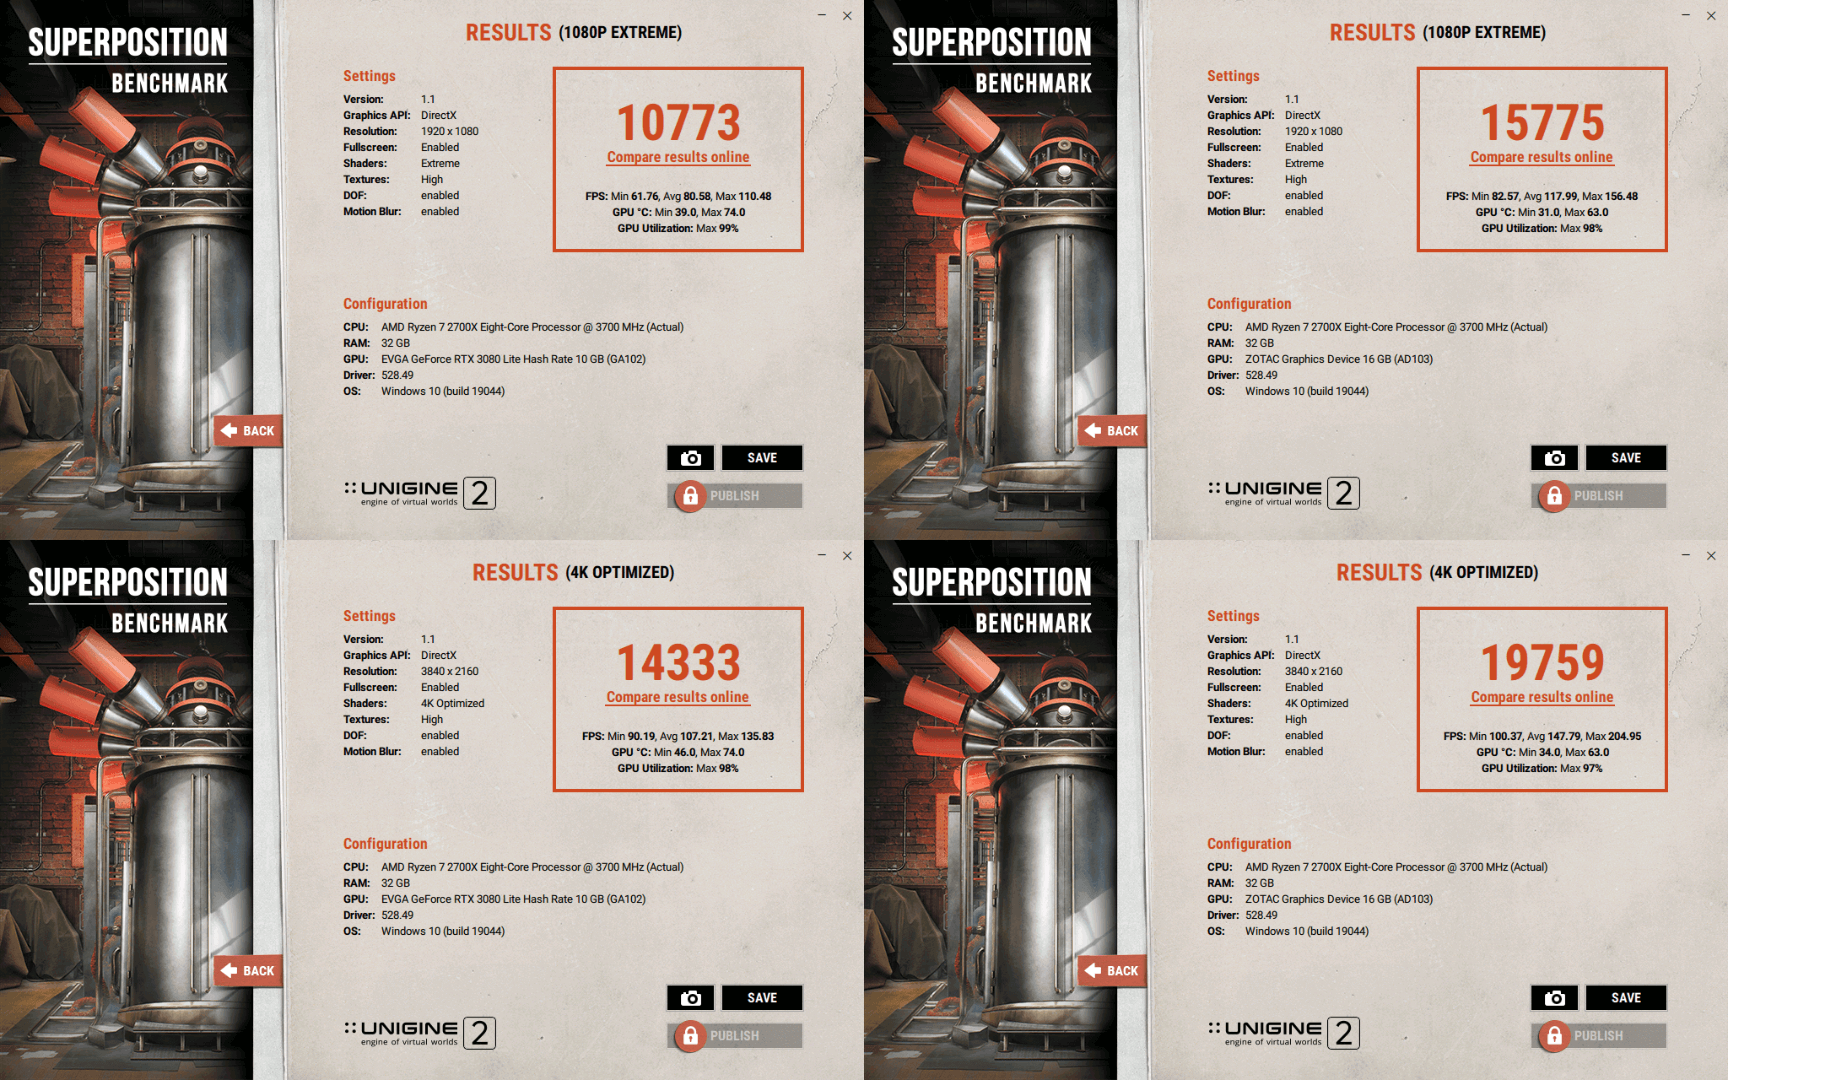 the superposition benchmarks showing the scores in the above section.